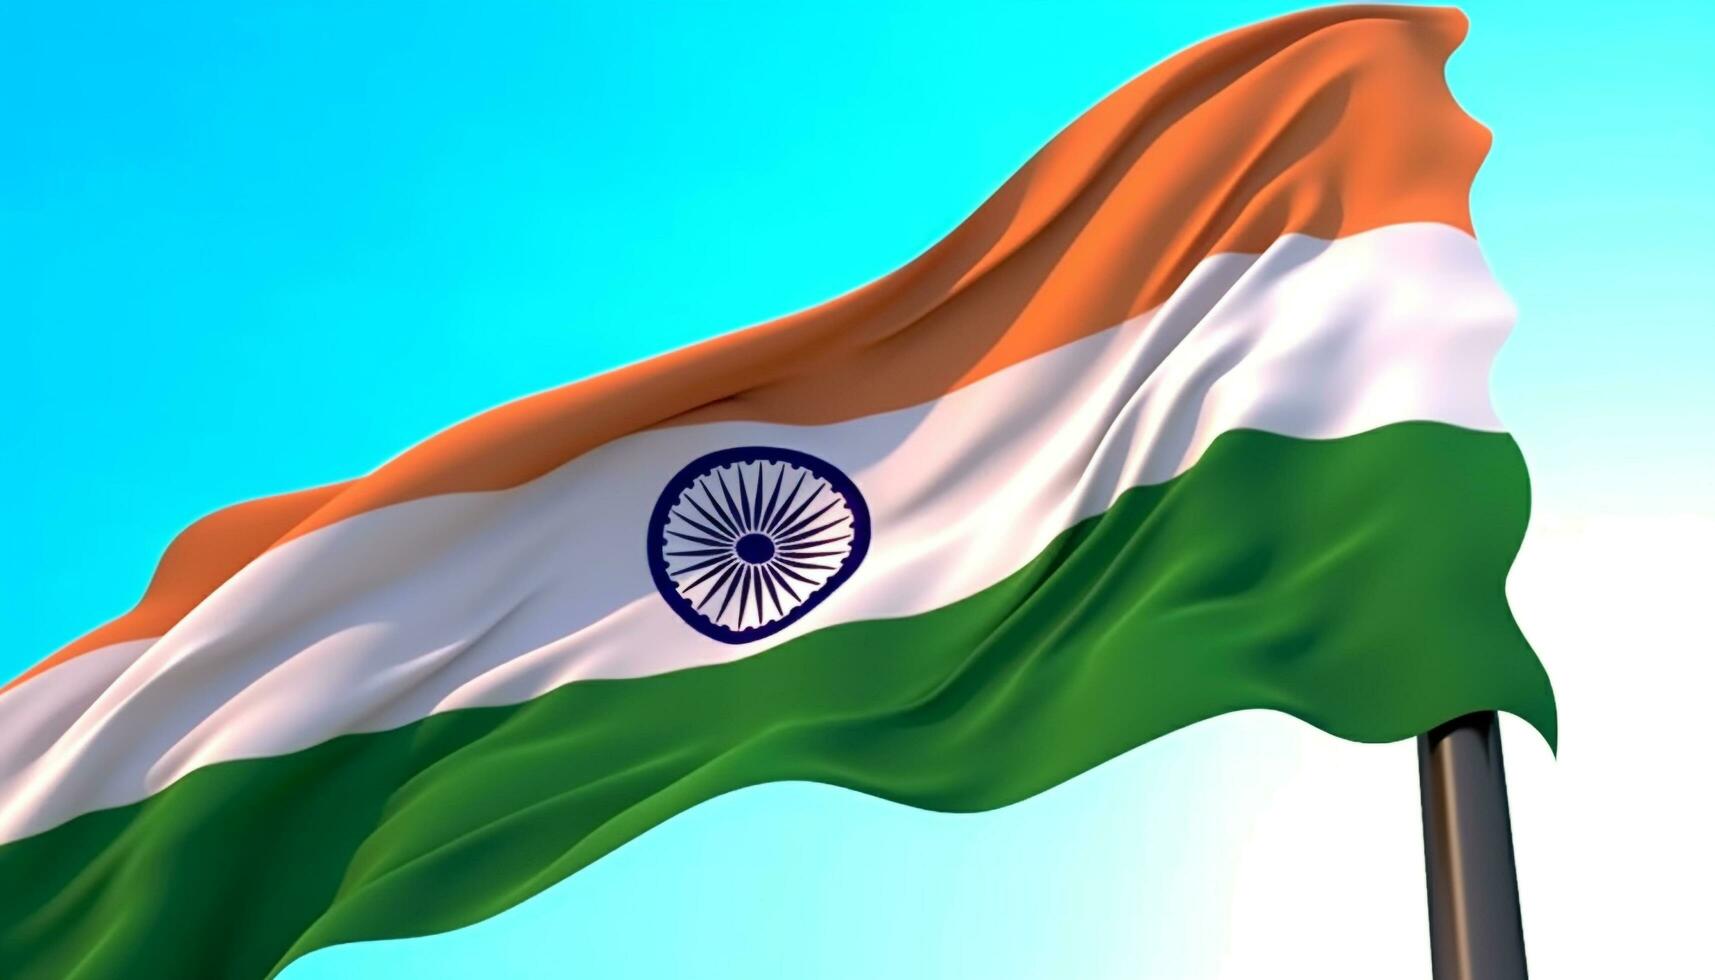 Waving tricolor flag symbolizes patriotism and national identity with pride generated by AI photo